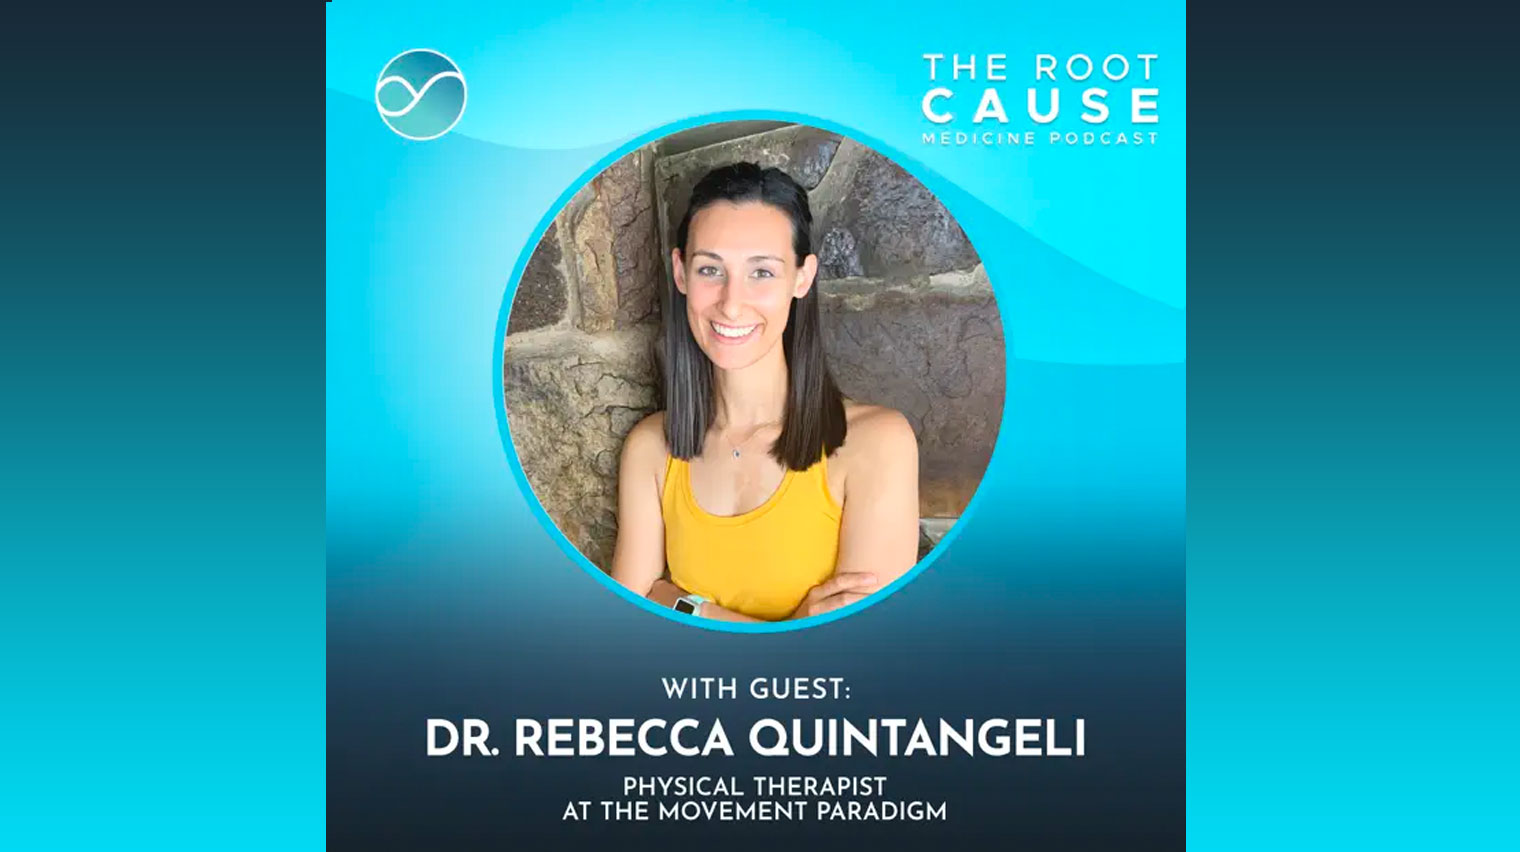 Podcast: The Root Cause Medicine Podcast – A Holistic Approach to Pelvic Floor Health with Dr. Rebecca Quintangeli